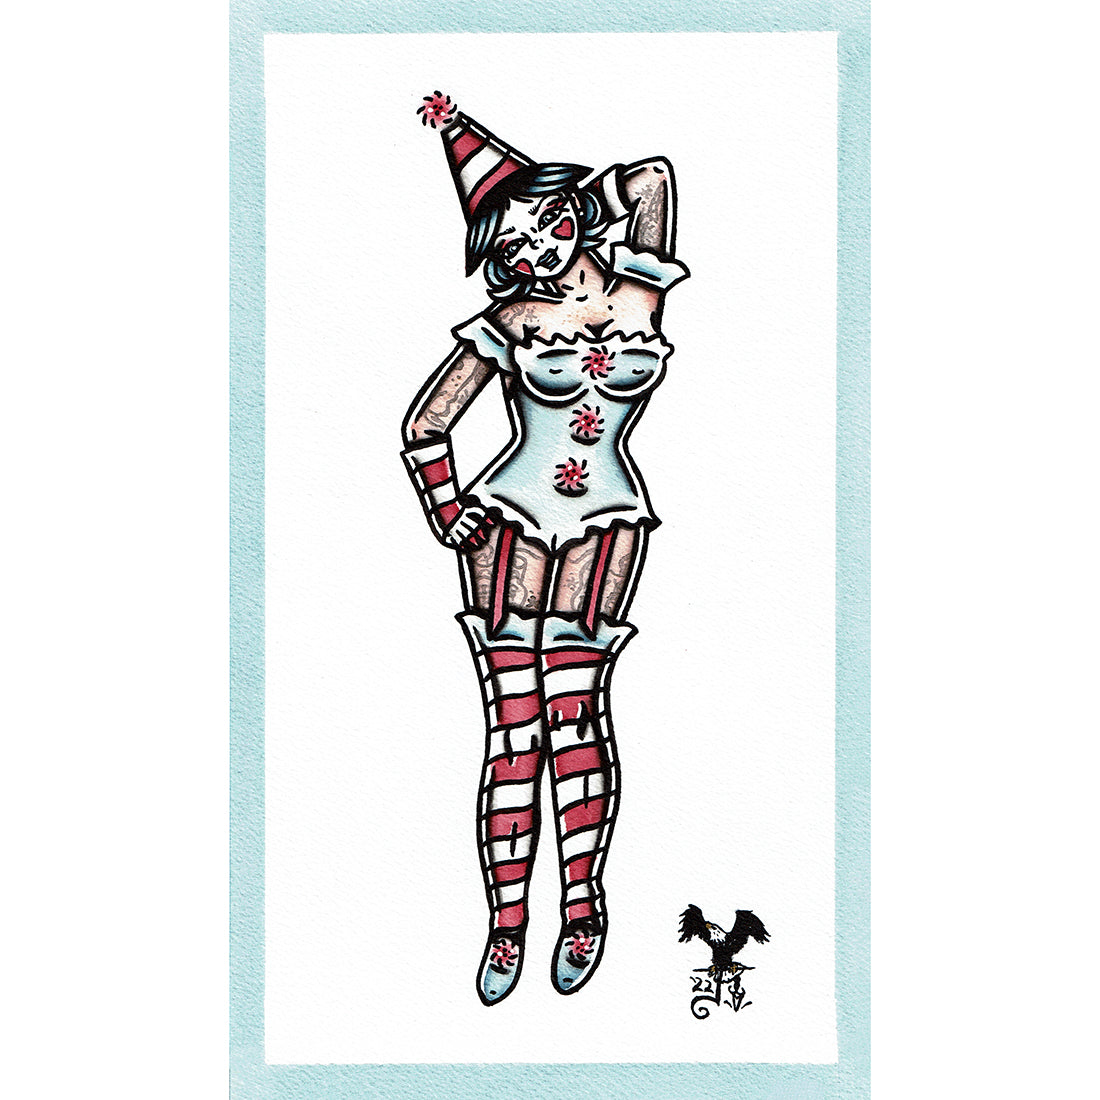 American traditional tattoo flash Clown Pinup watercolor painting.